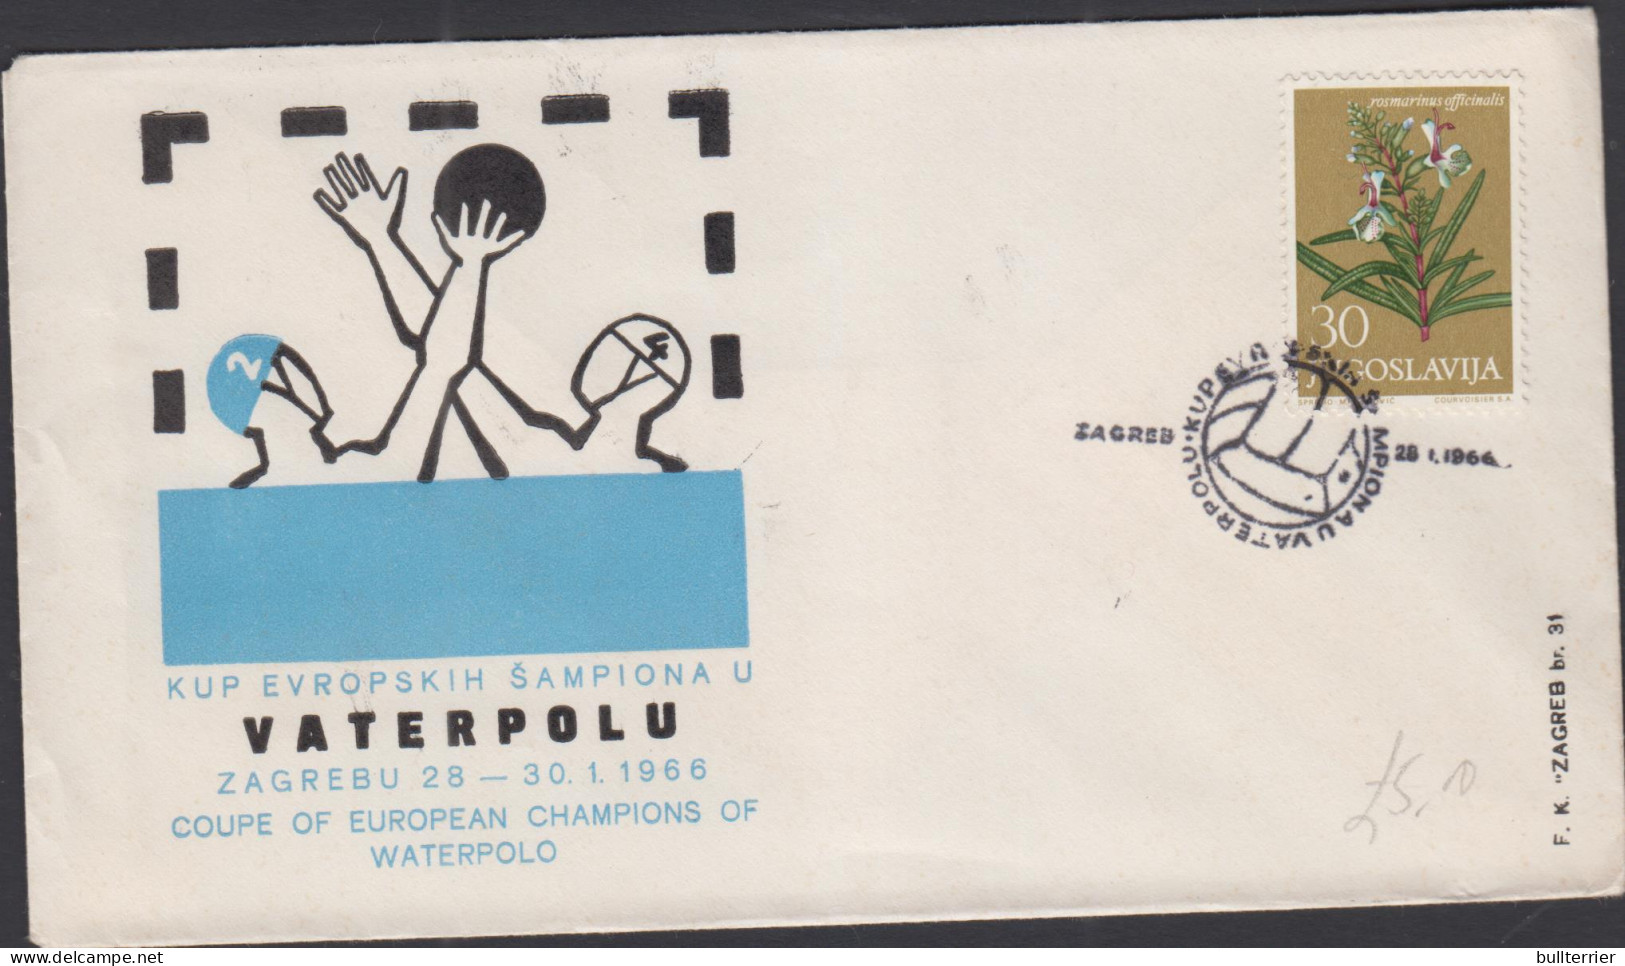 SPORTS - YUGOSLAVIA -1966- ILLUSTRATED COVER AND POSTMARK WATER POLO CUP - INTERESTING ITEM  - Water Polo